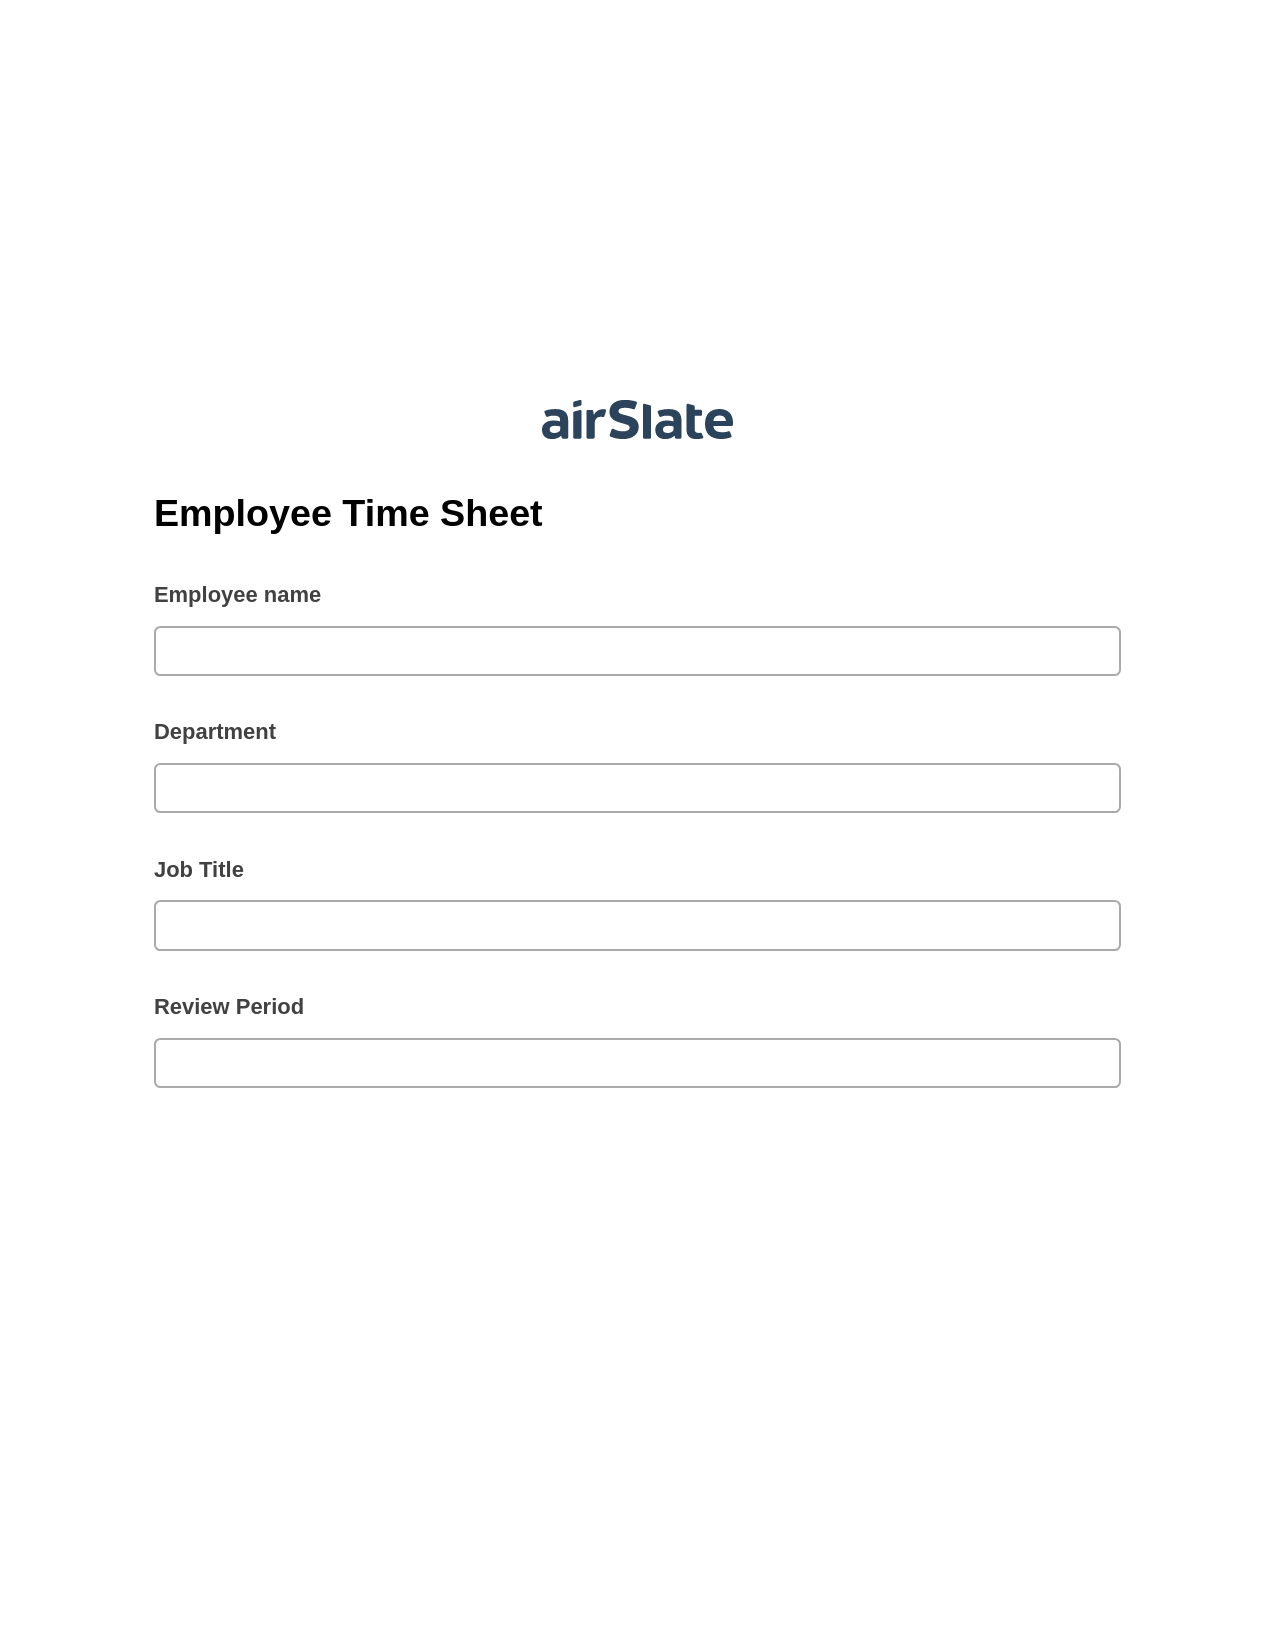 Employee Time Sheet Pre-fill from MS Dynamics 365 Records, Create Salesforce Records Bot, Export to WebMerge Bot